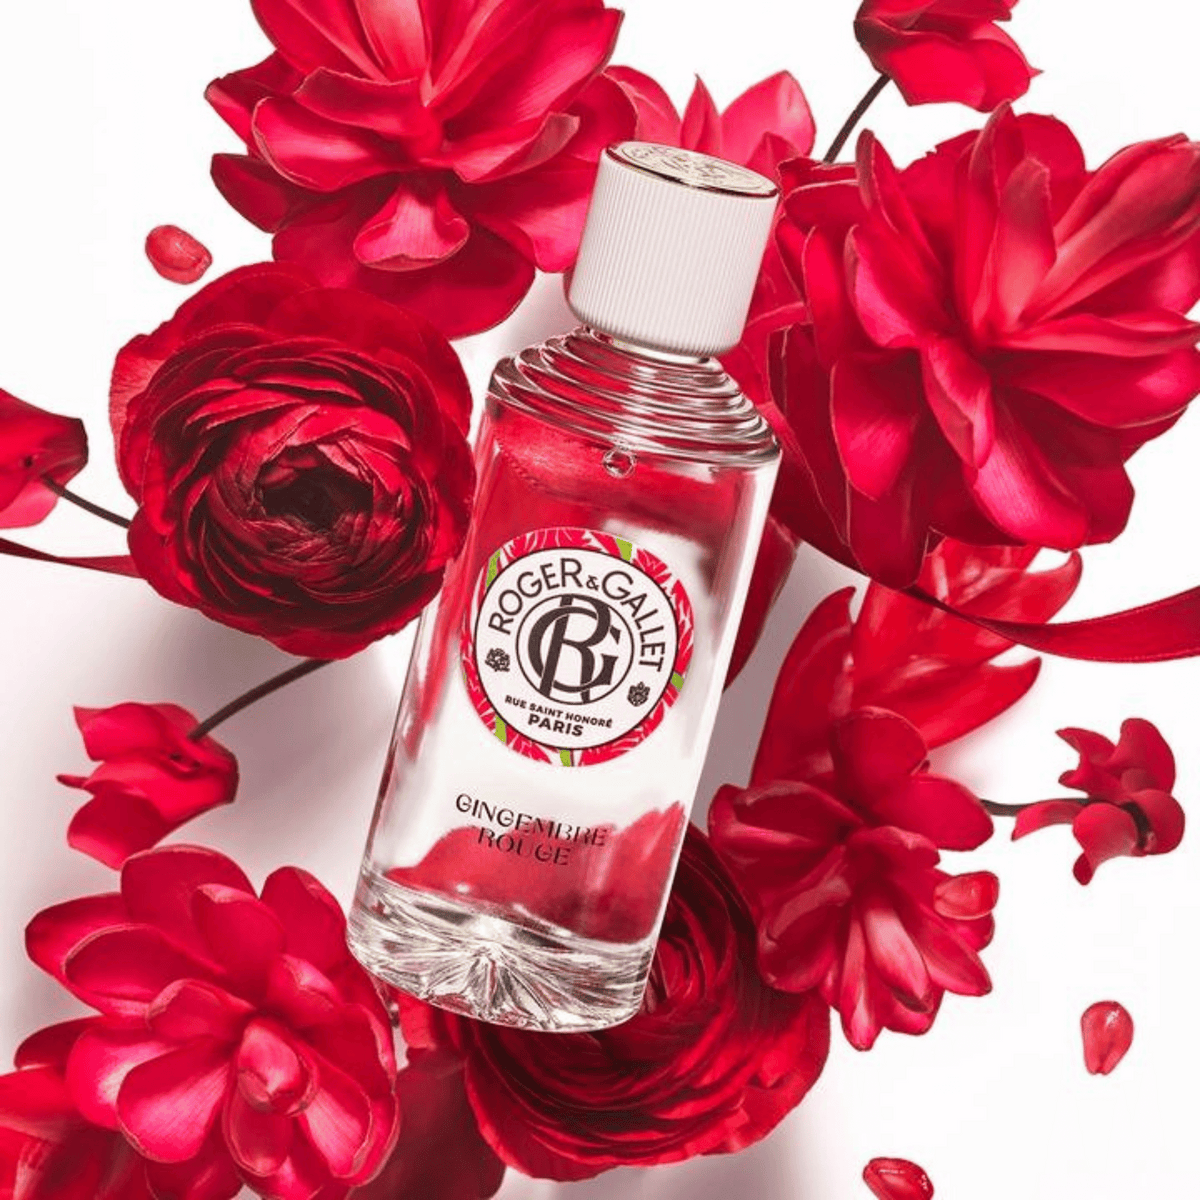 Alternate Image of Gingembre Rouge (Red Ginger) Wellbeing Water Fragrance Spray